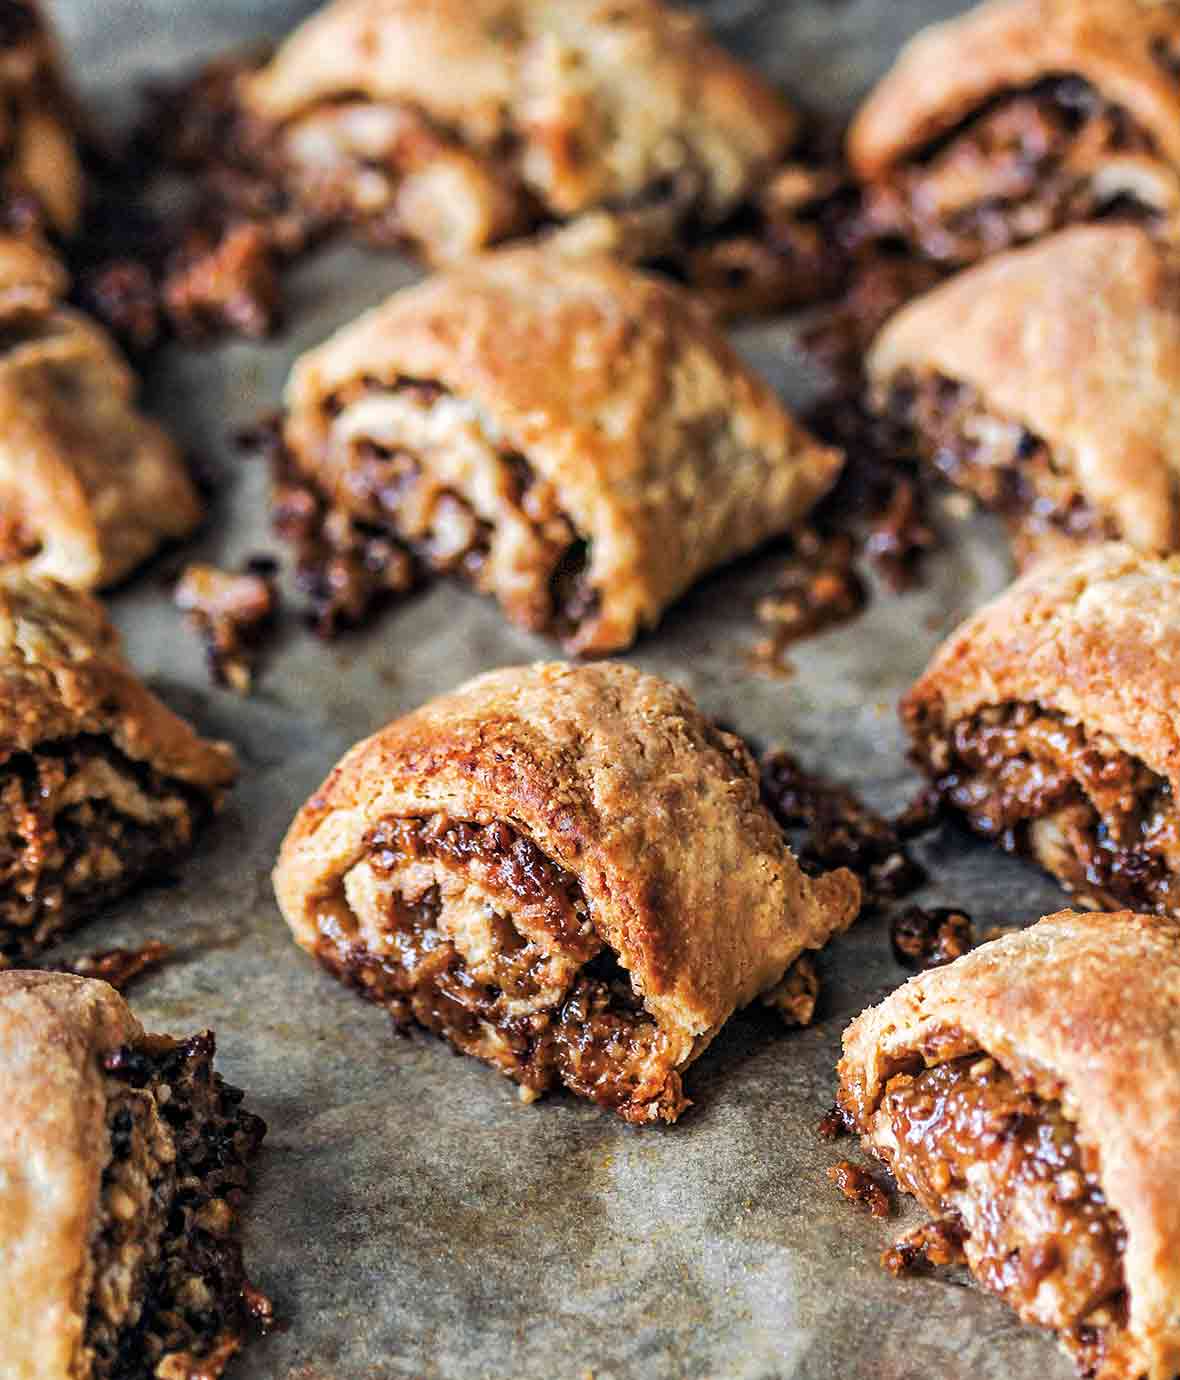 A dozen golden brown pecan pie rugelach with the filling oozing out